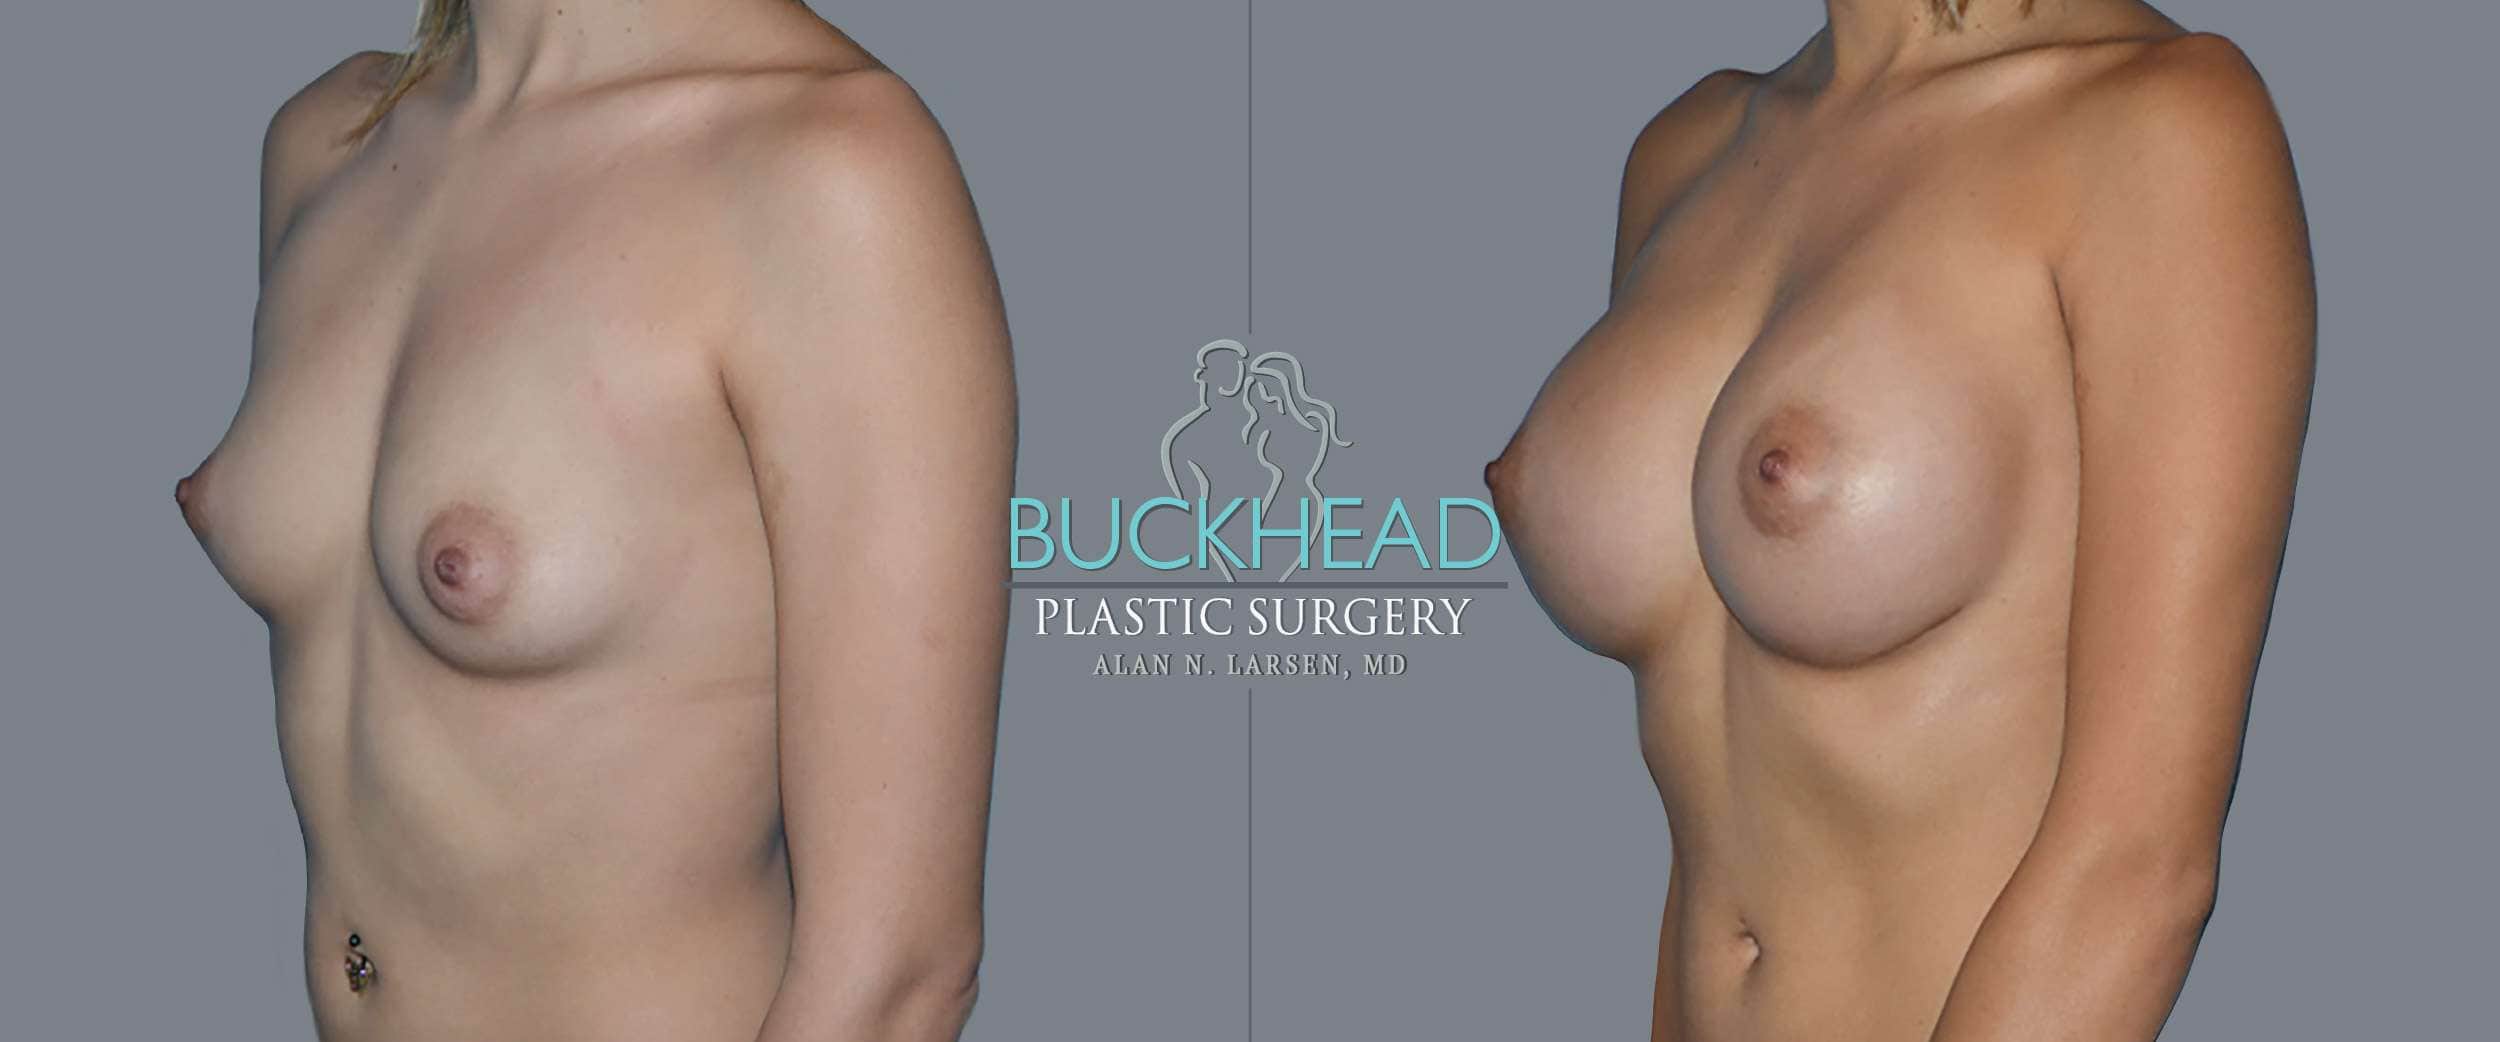 Before and After Photo Gallery | Breast Augmentation | Buckhead Plastic Surgery | Alan N. Larsen, MD | Double Board-Certified Plastic Surgeon in Atlanta GA